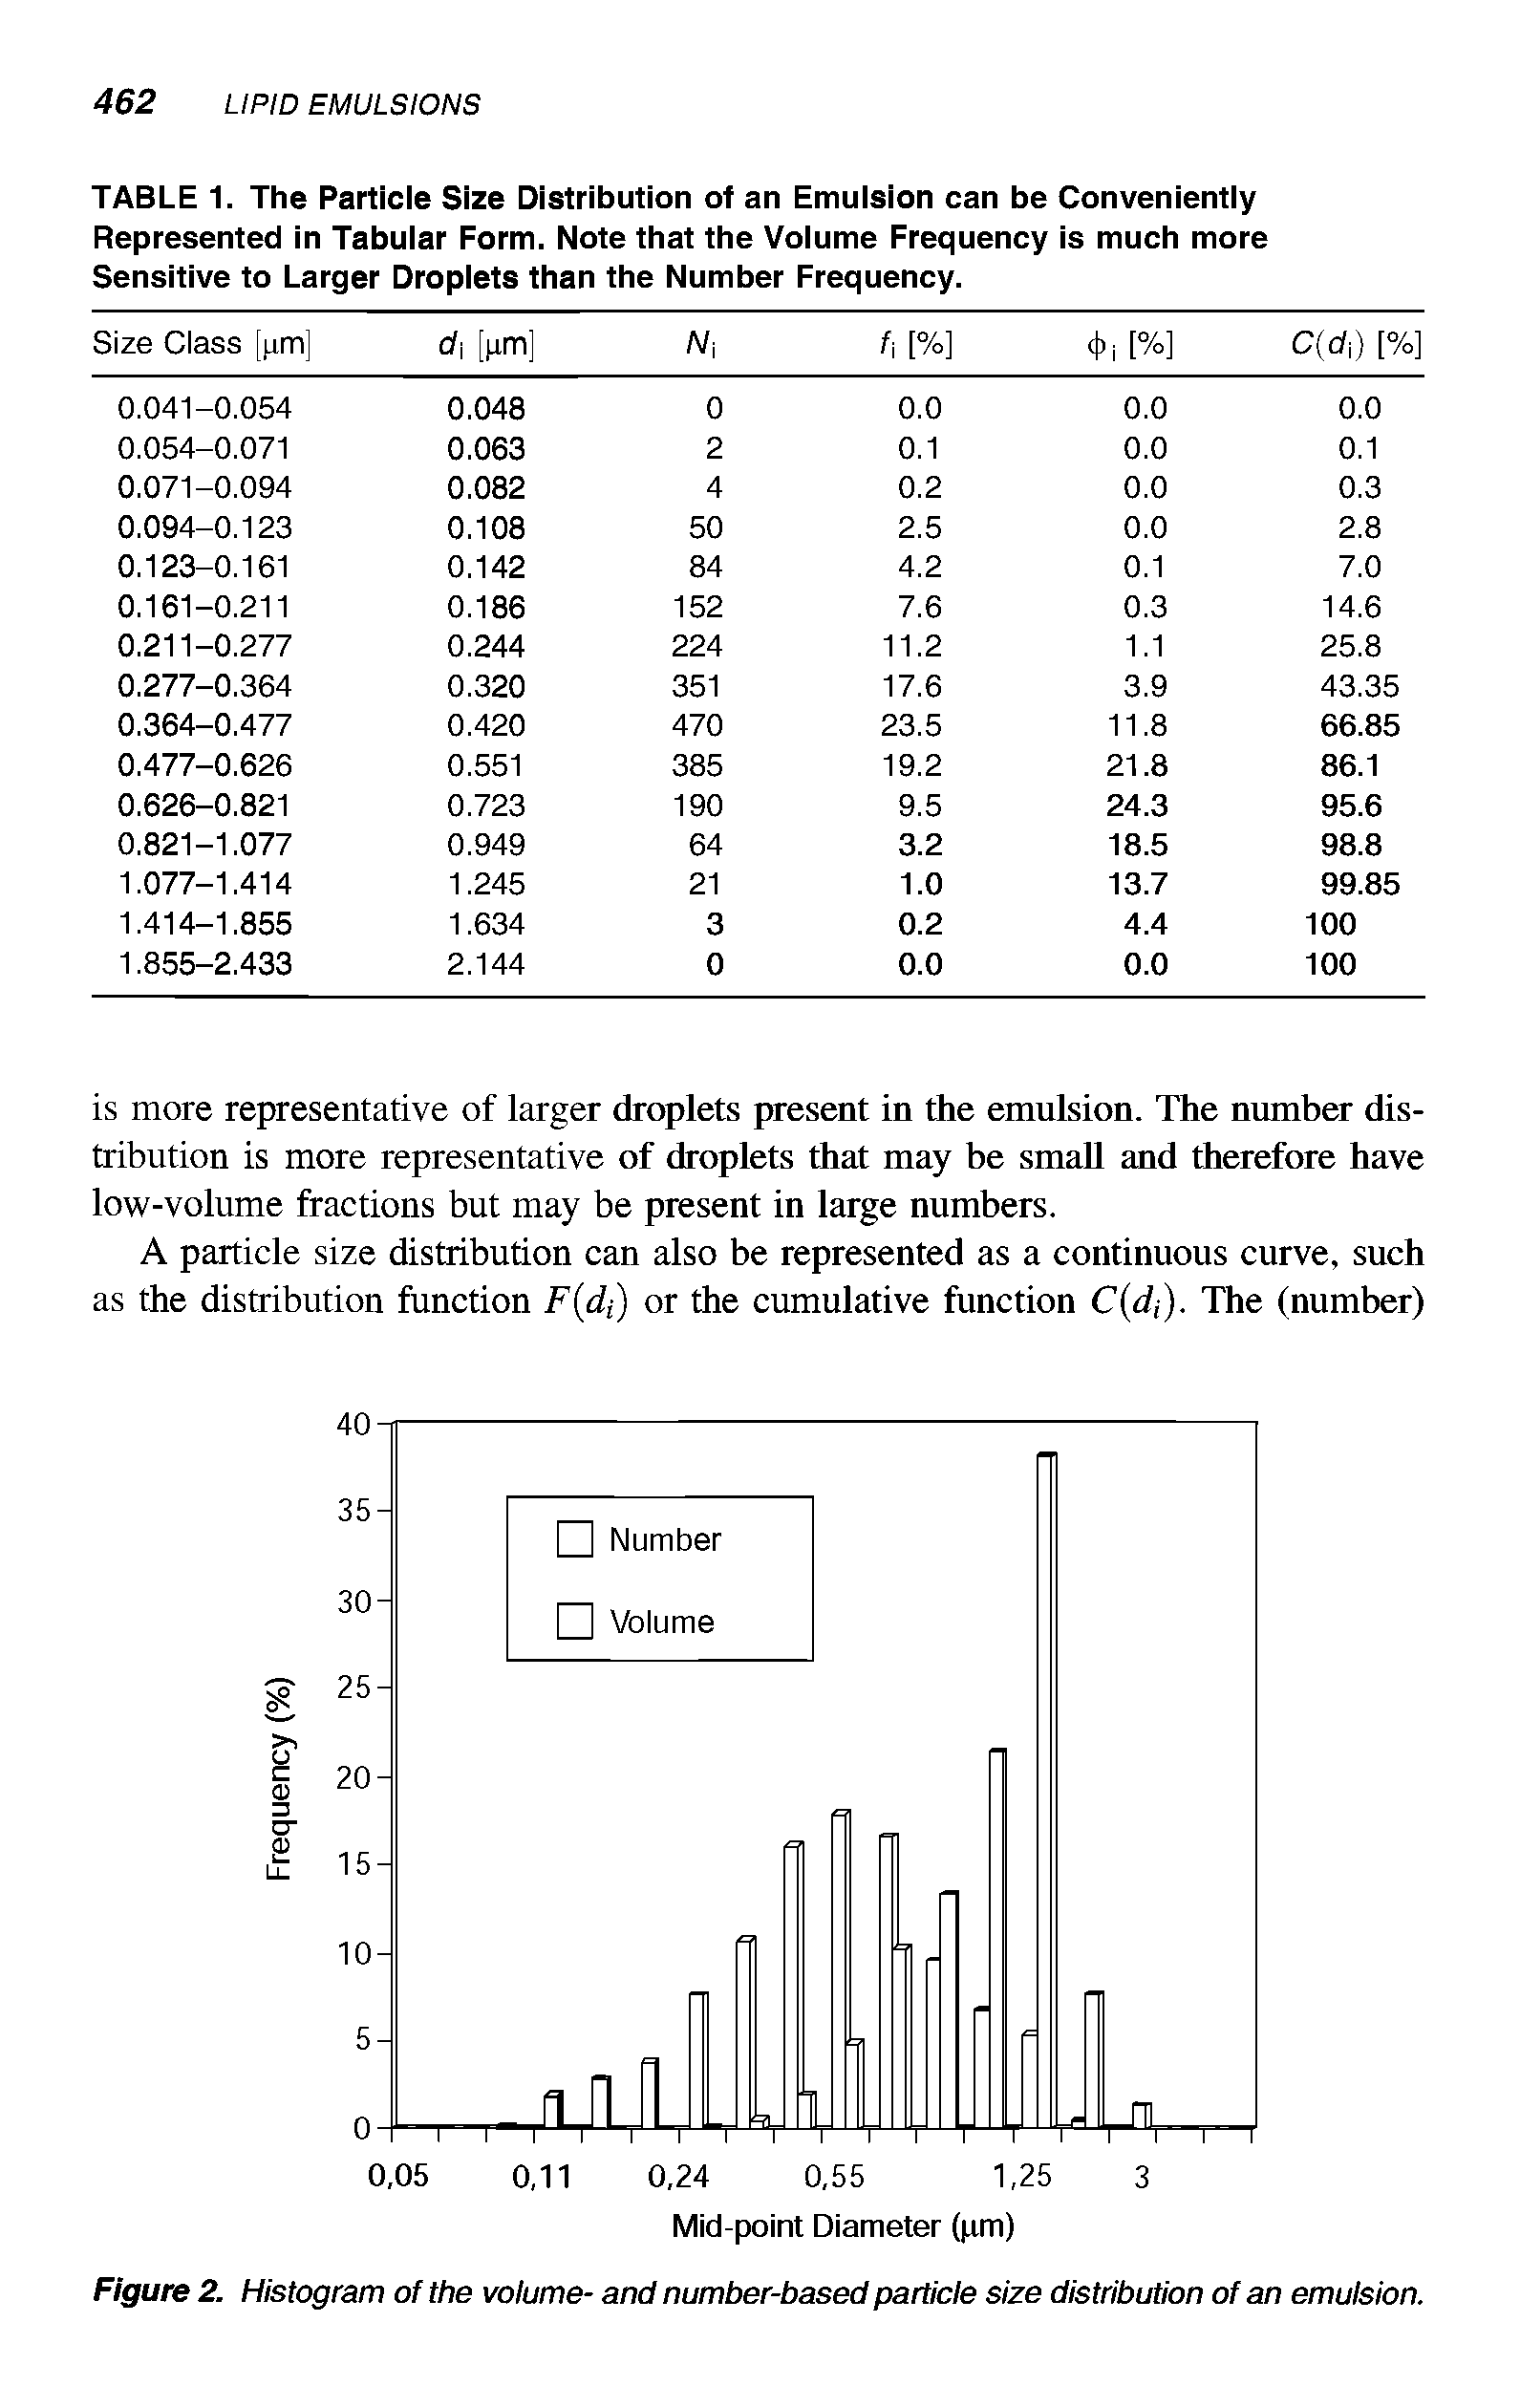 Figure 2. Histogram of the volume- and number-based particle size distribution of an emulsion.